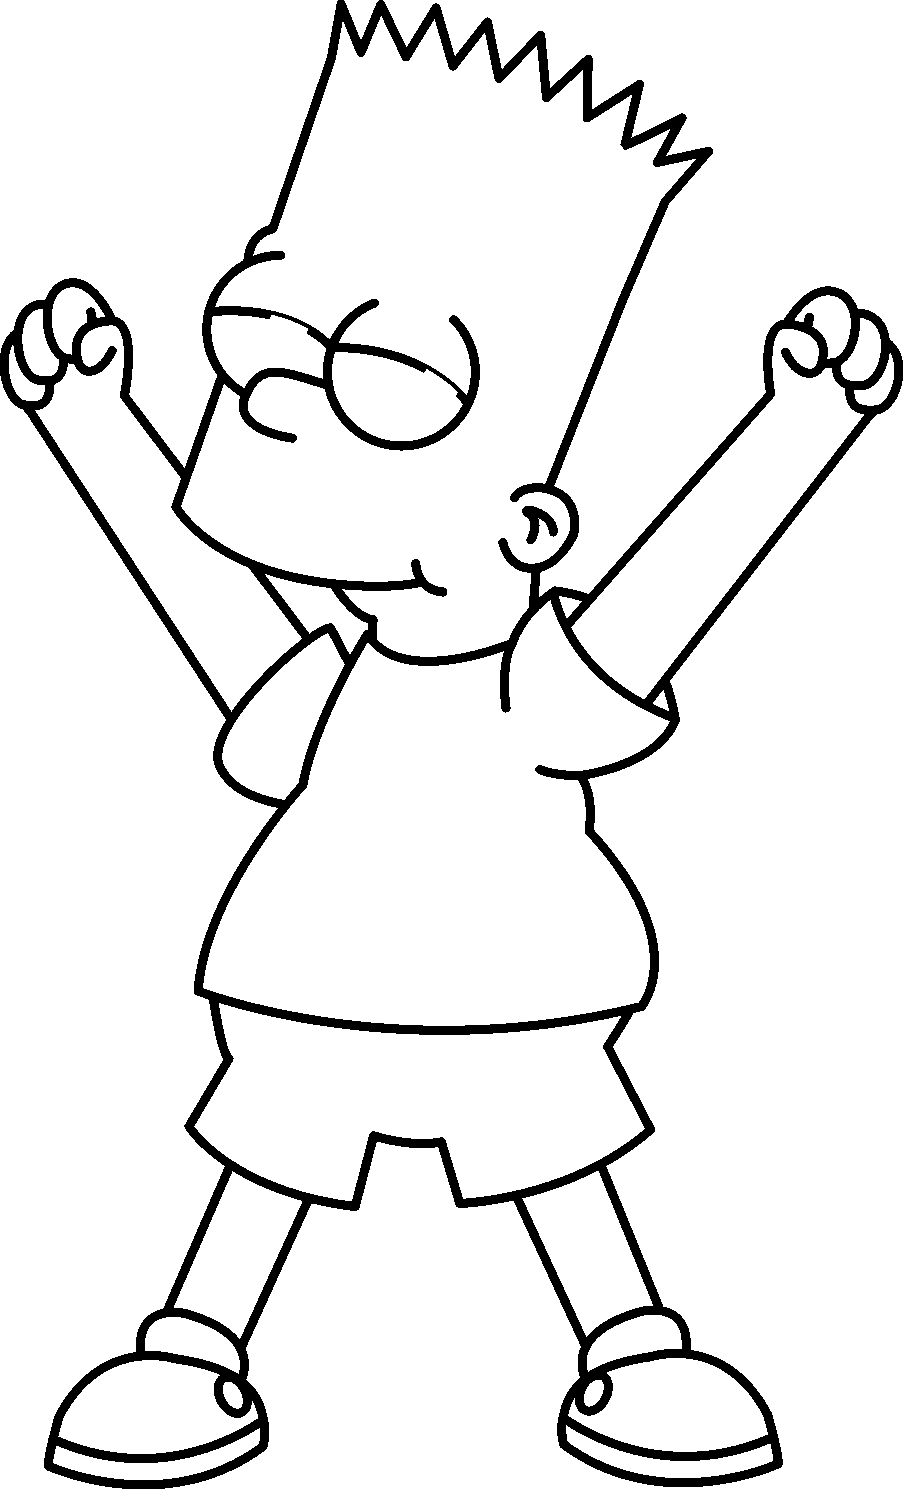 The Simpsons Coloring Pages TV Film Simpsons Images Printable 2020 09612 Coloring4free